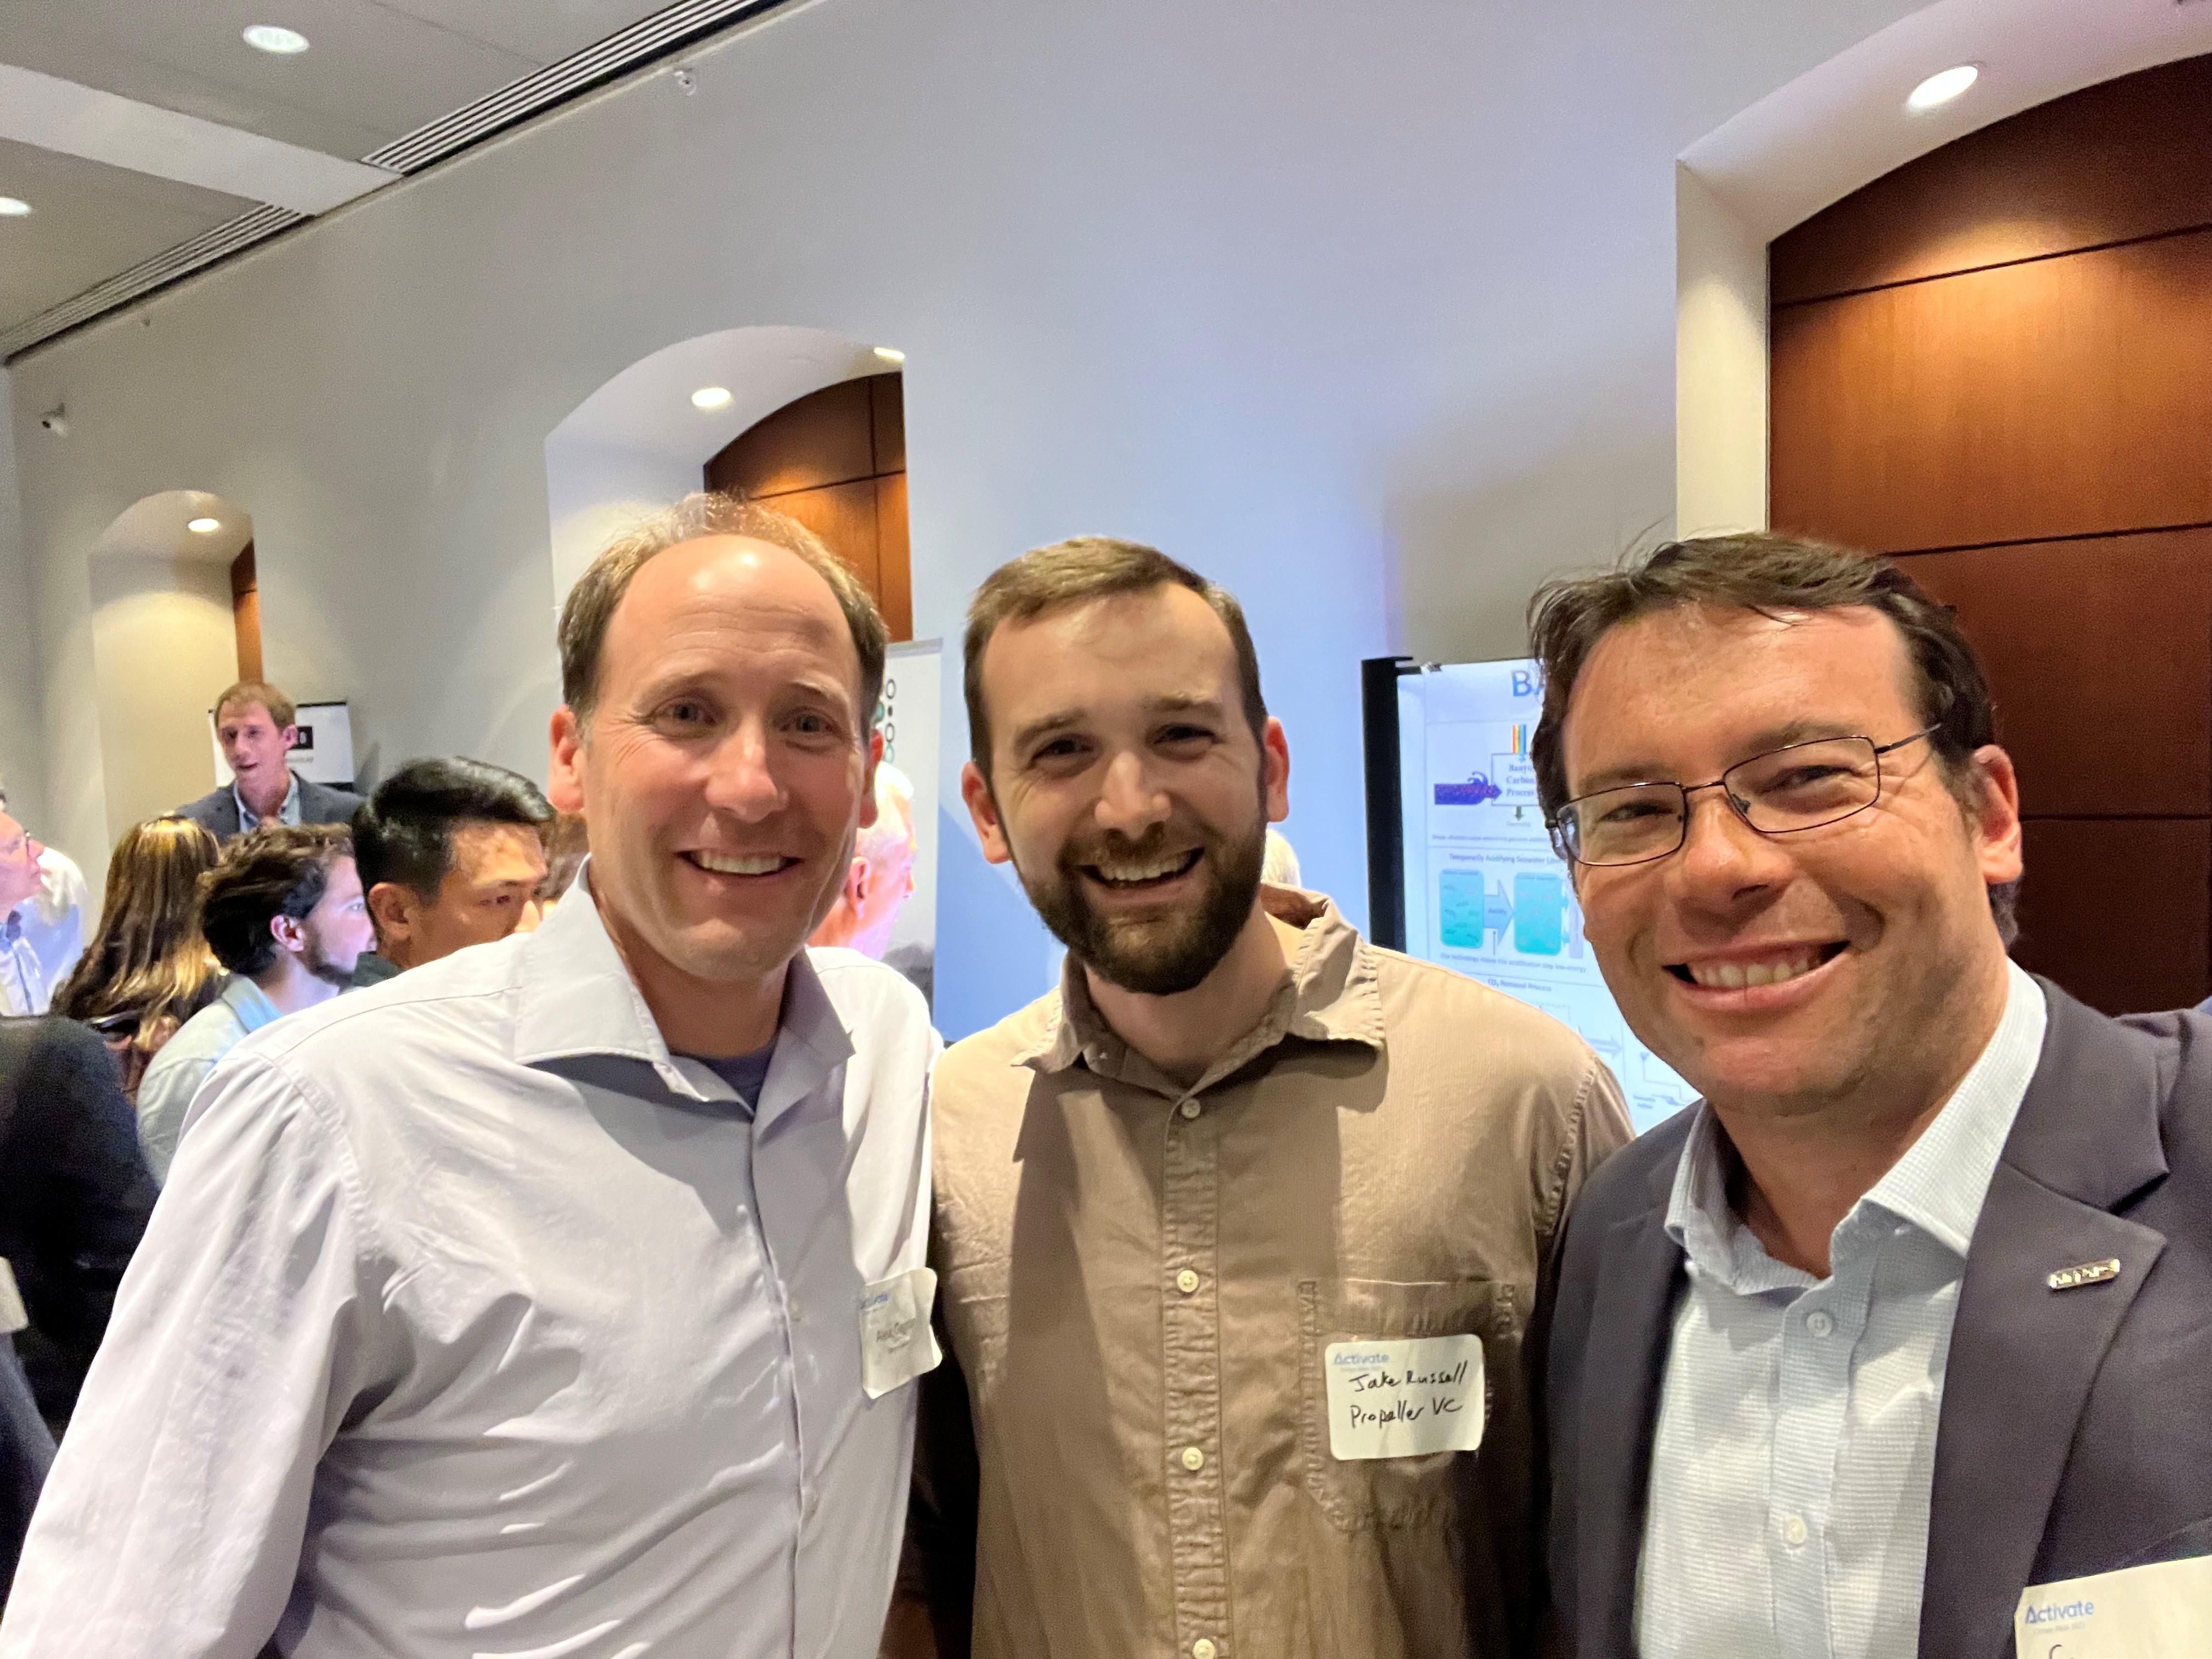 Program Director Dr. Simon Freeman (right) with Propeller VC principal and former ARPA-E fellow Dr. Jake Russell (center) at the Activate Demo Hall.